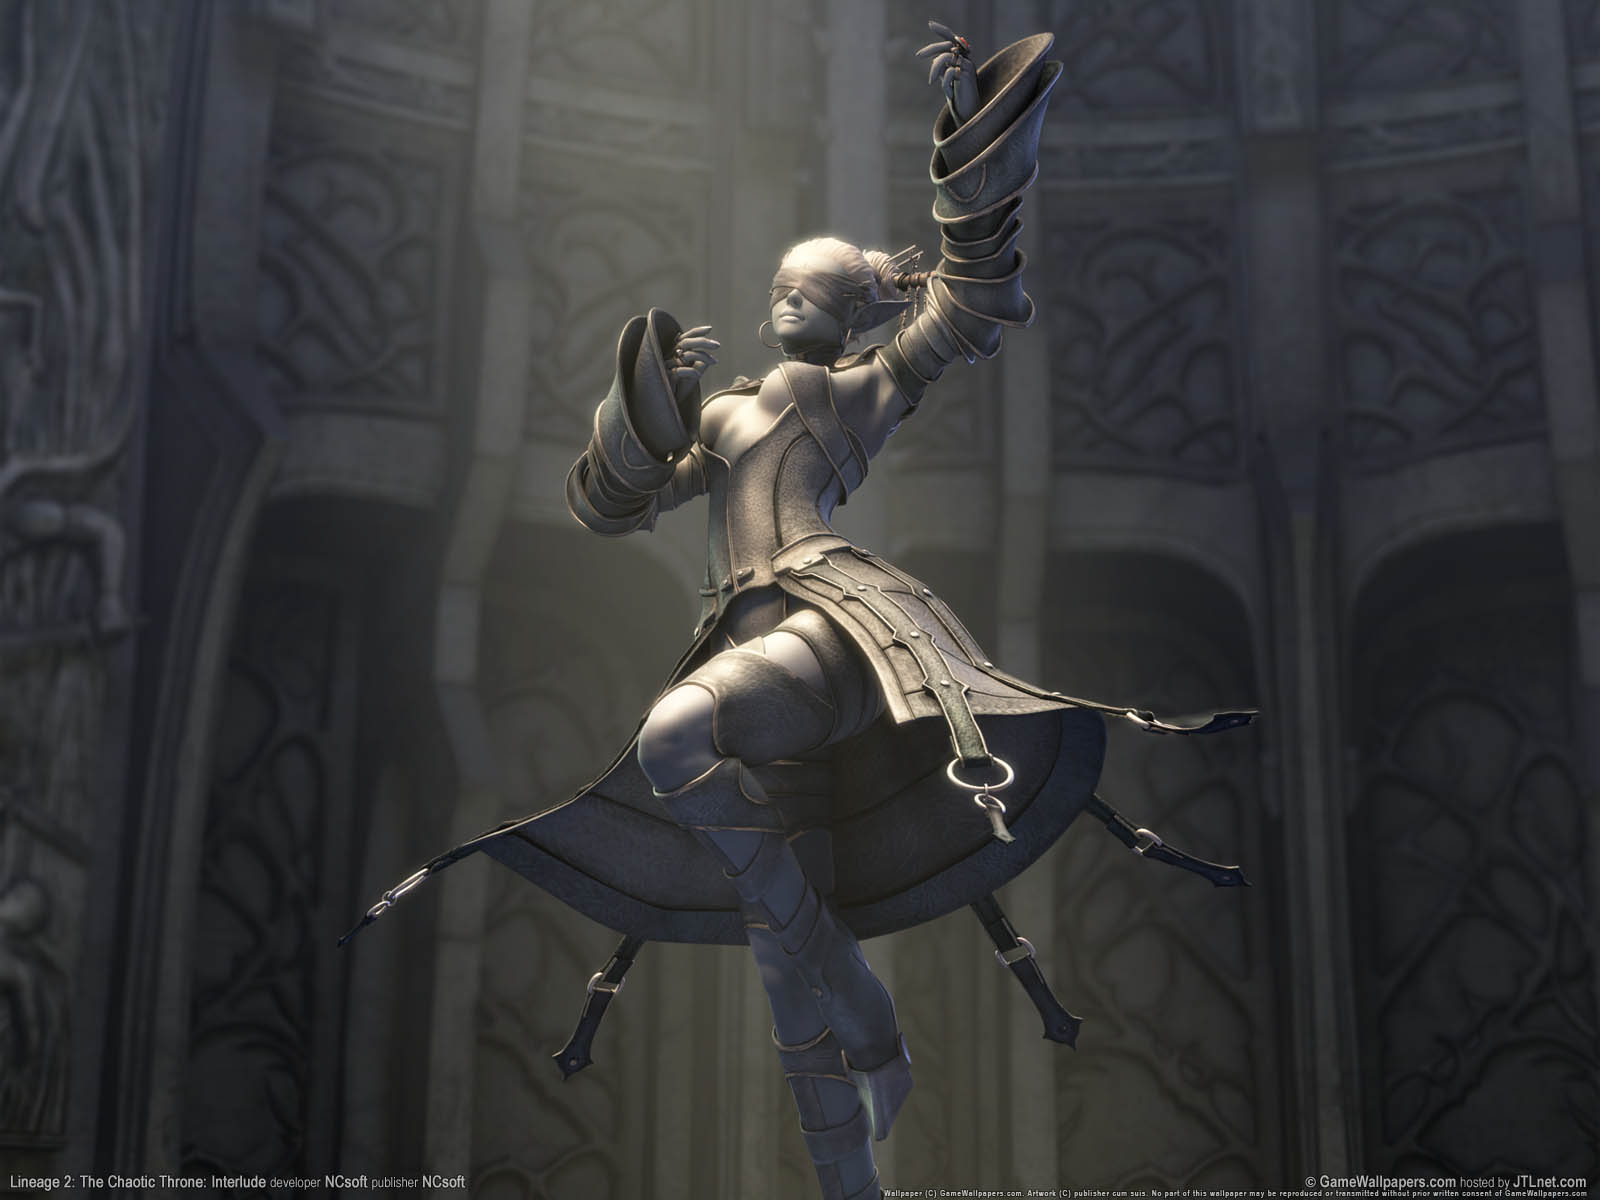 Lineage 2: The Chaotic Throne: Interlude achtergrond 02 1600x1200